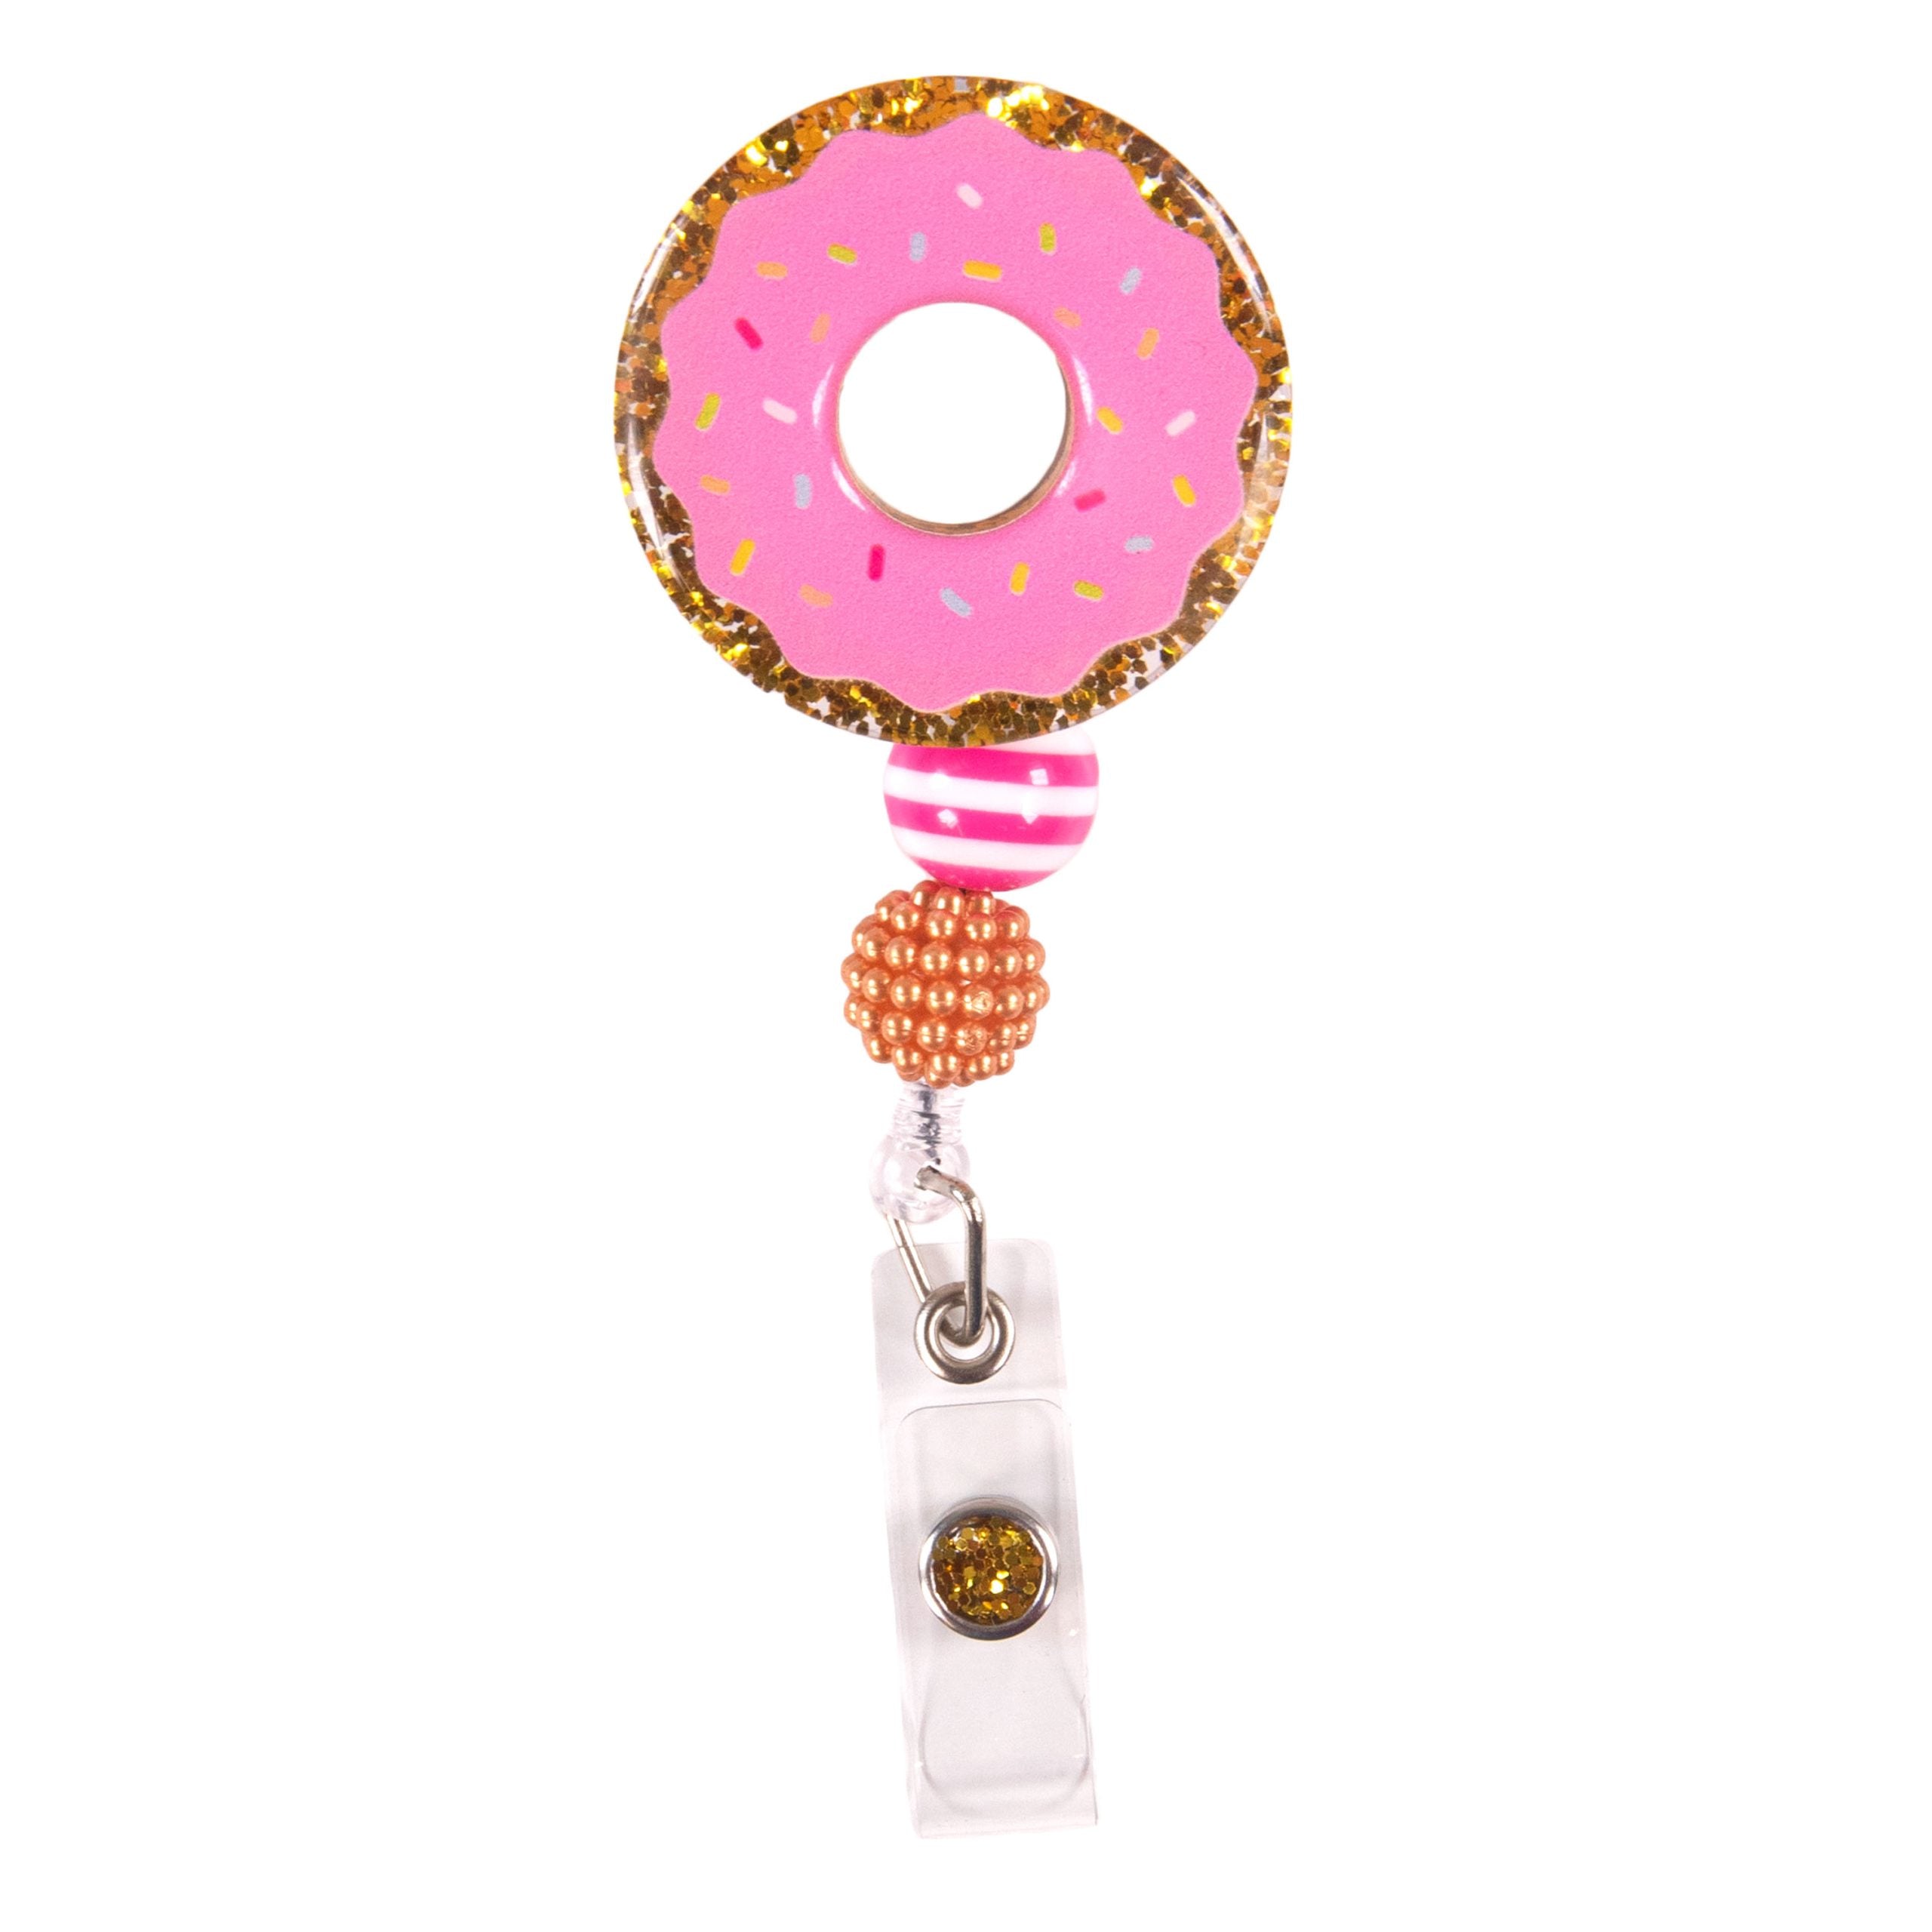 New Badge Reels by Simply Southern have arrived! #supercute